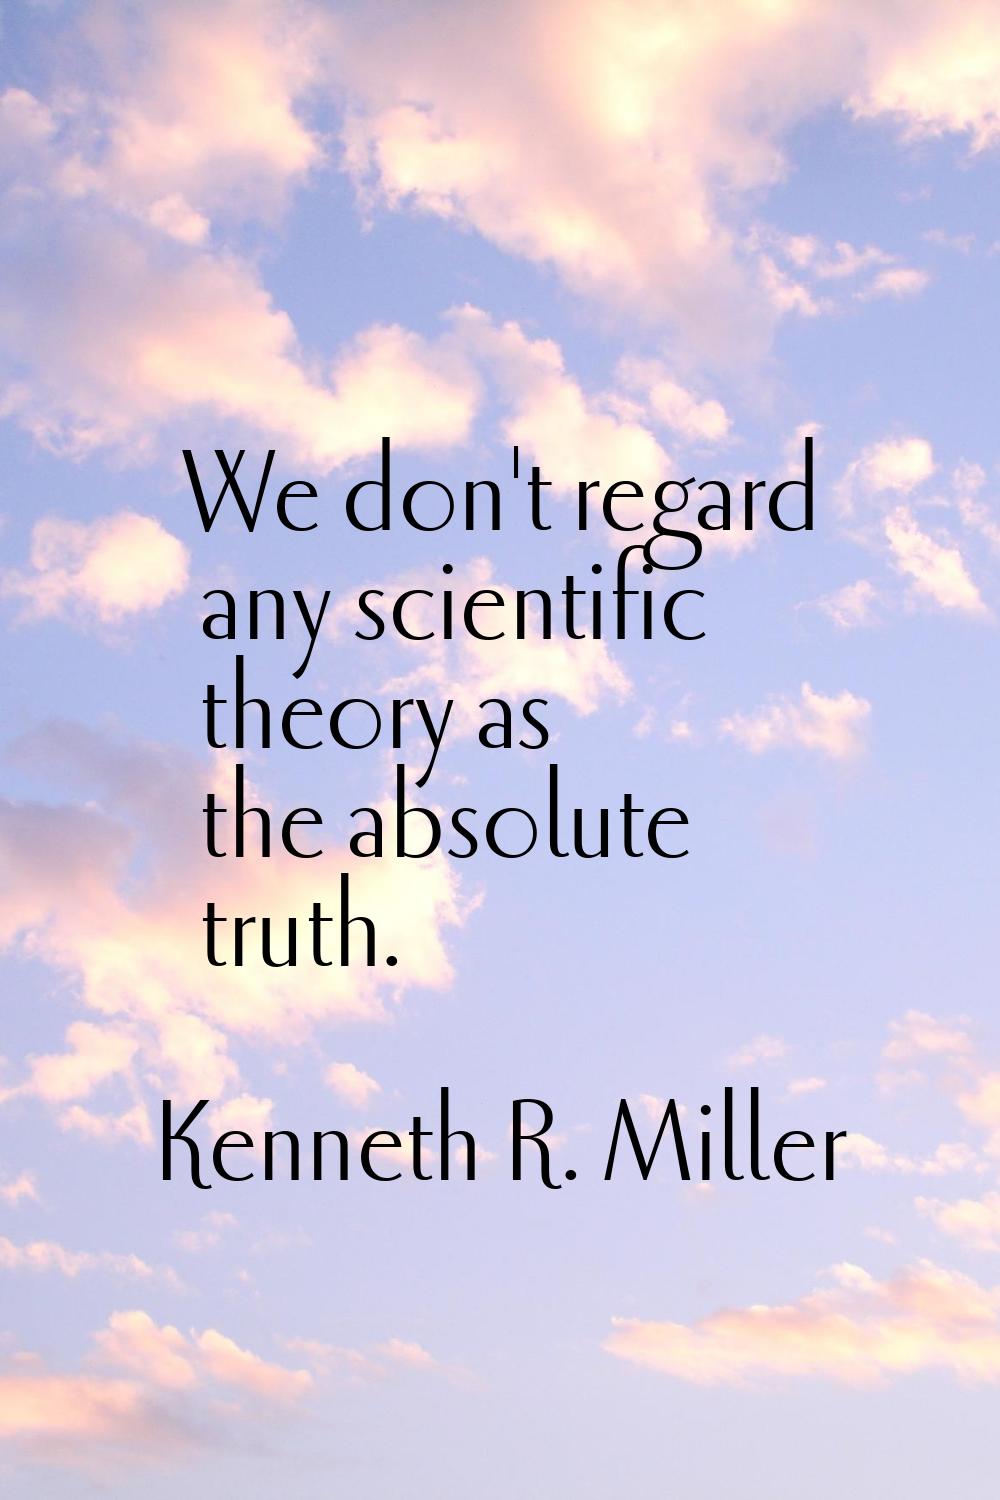 We don't regard any scientific theory as the absolute truth.